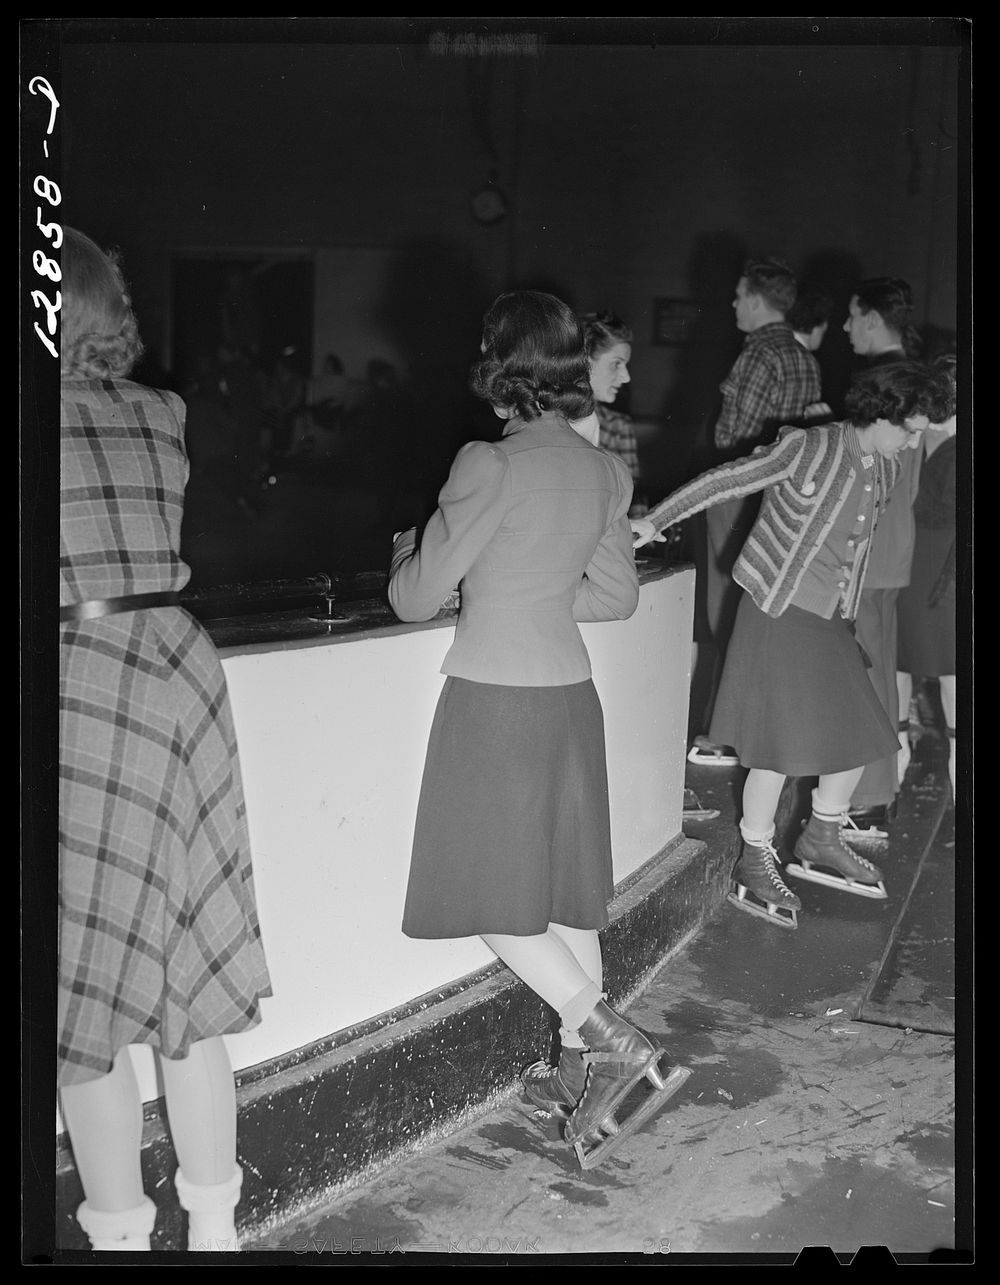 Chevy Chase Ice Palace, Washington. D.C. Skaters resting. Sourced from the Library of Congress.